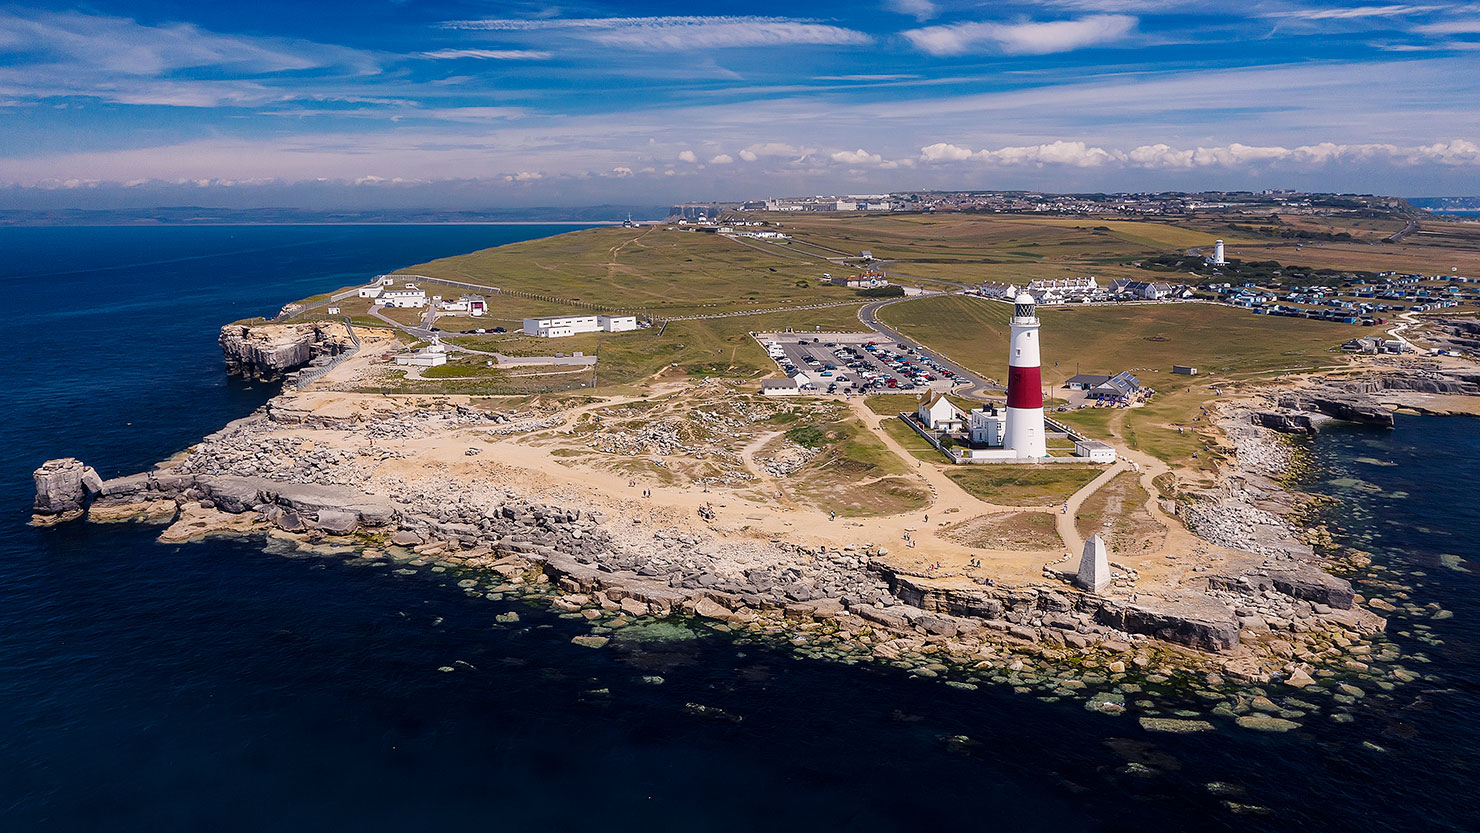 Portland Bill Dorset Jurassic Coast Pulpit Rock Drone Aerial Plane Helicopter Photography Licensed Commercial Operator FAA Part 107 CAA PfCO Operations Commission Paul Reiffer